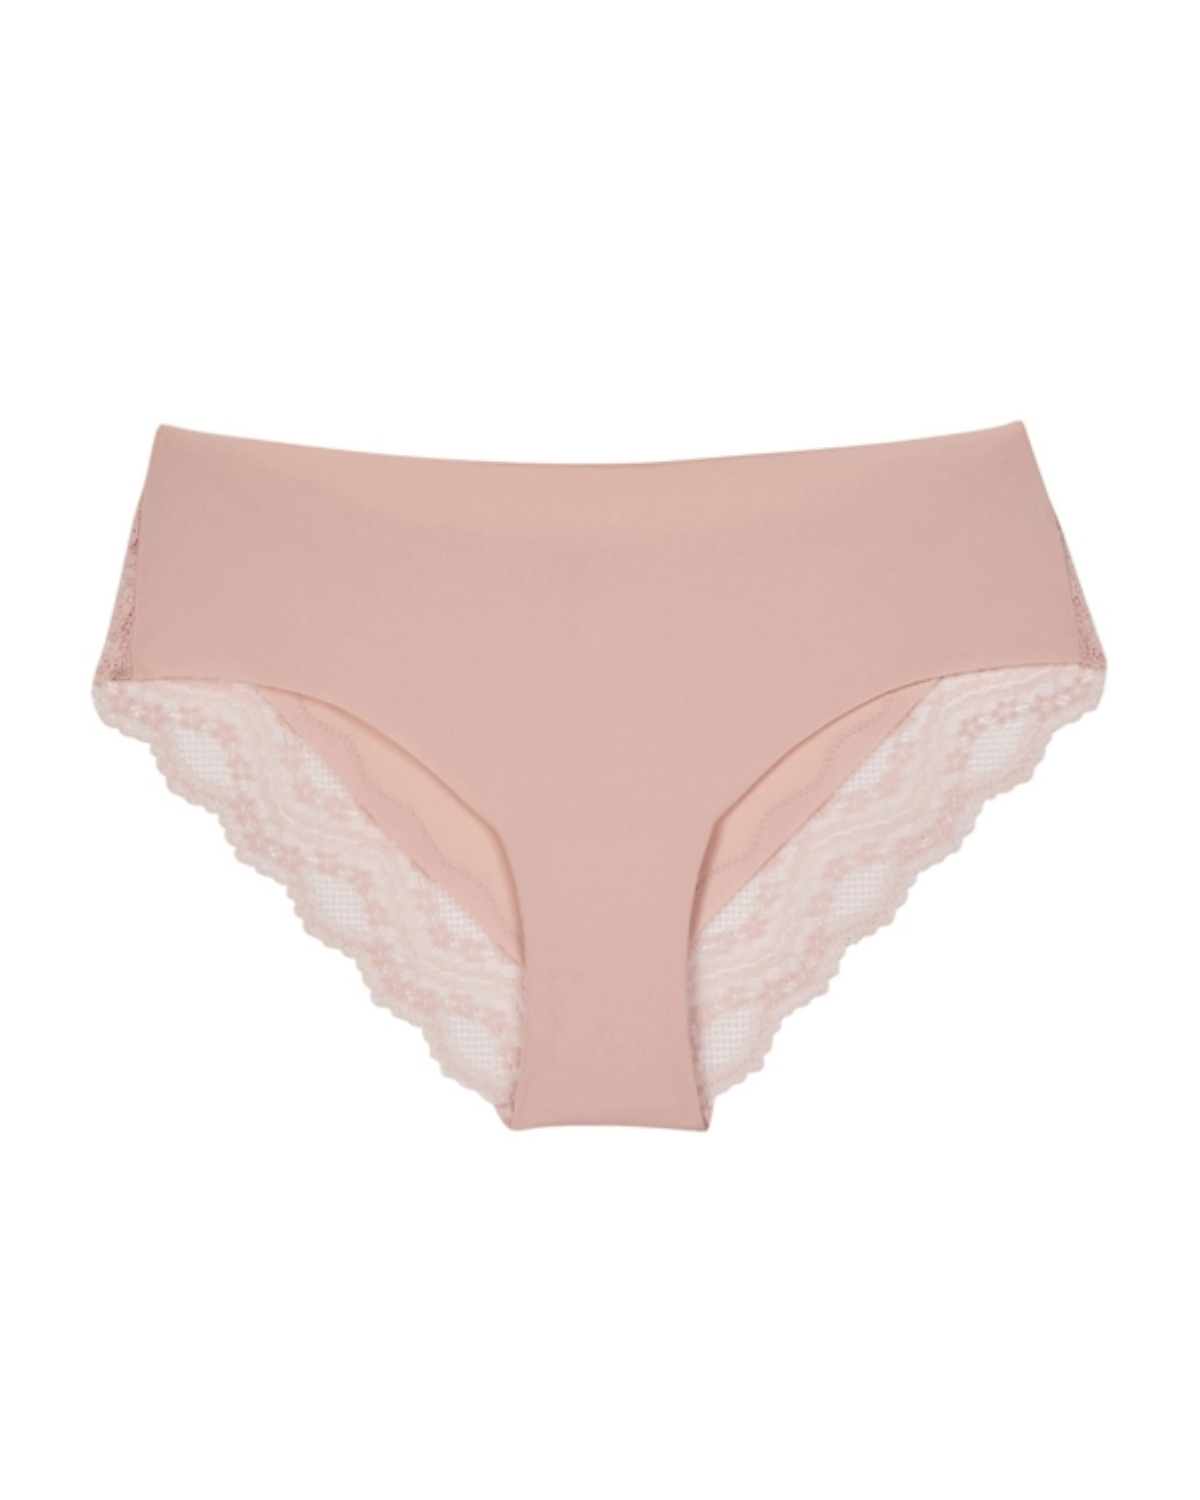 Women's light pink seamless hipster panty with  cheeky lace back.